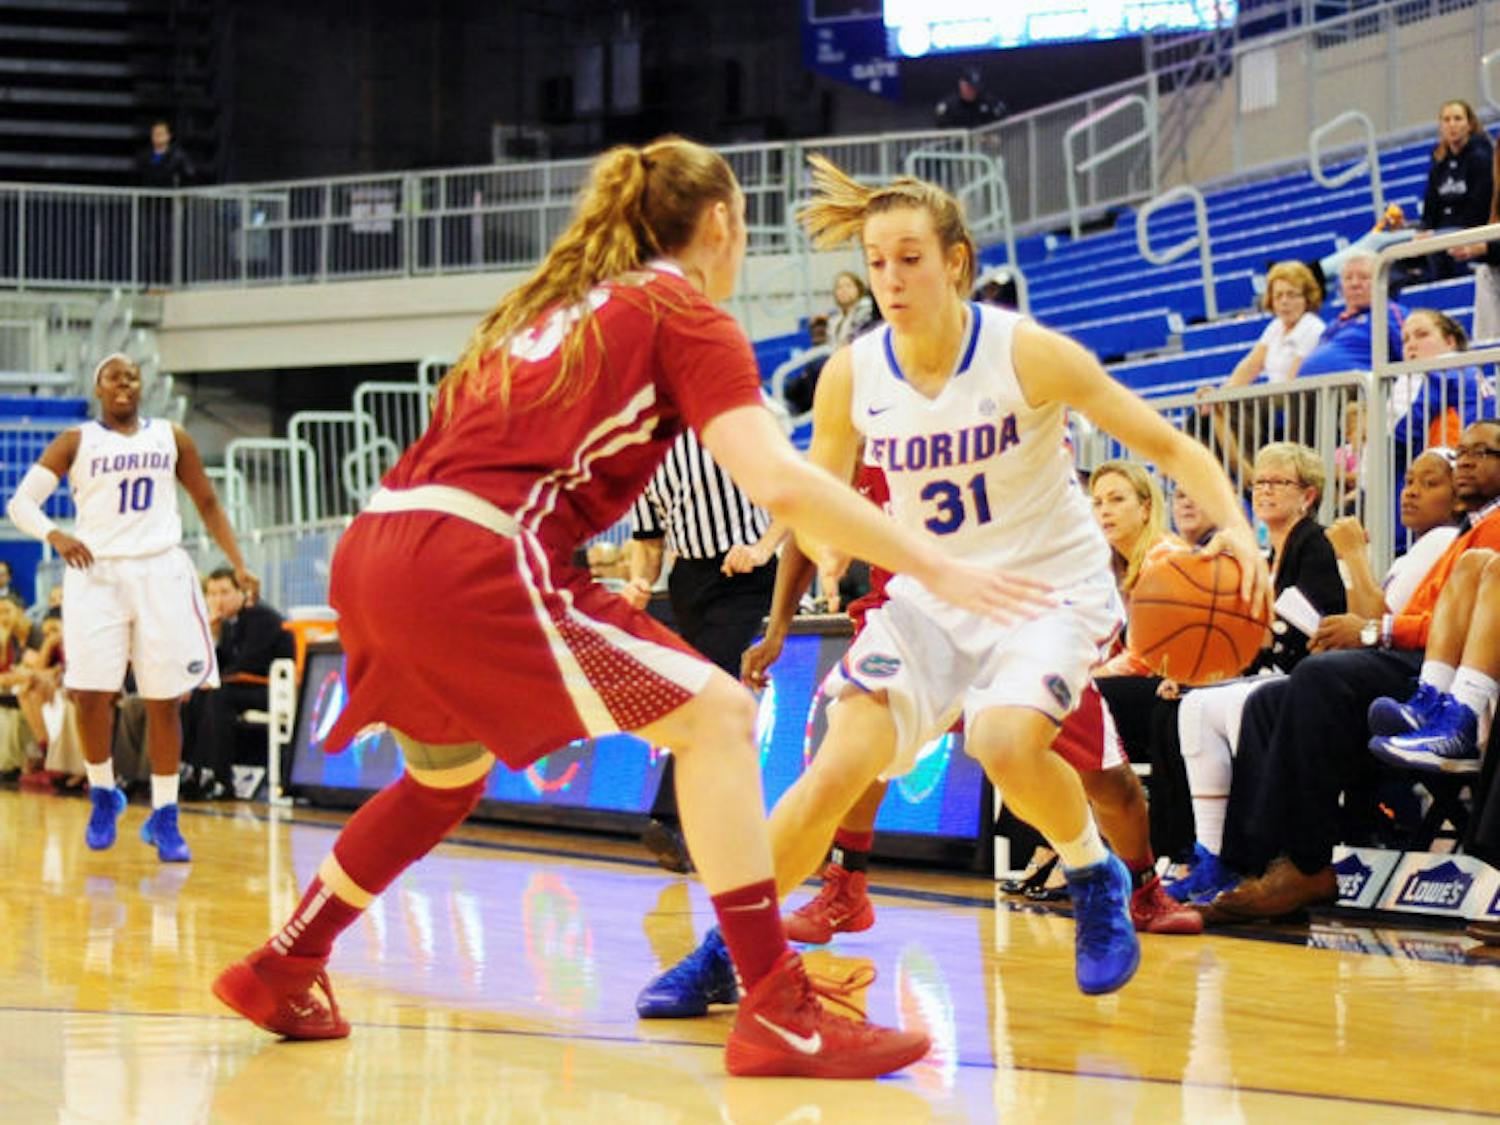 Lily Svete drives to the lane during Florida’s 75-67 win against Alabama on Jan. 30 in the O’Connell Center. Svete’s last game was Florida’s 81-63 loss to Penn State on Tuesday.